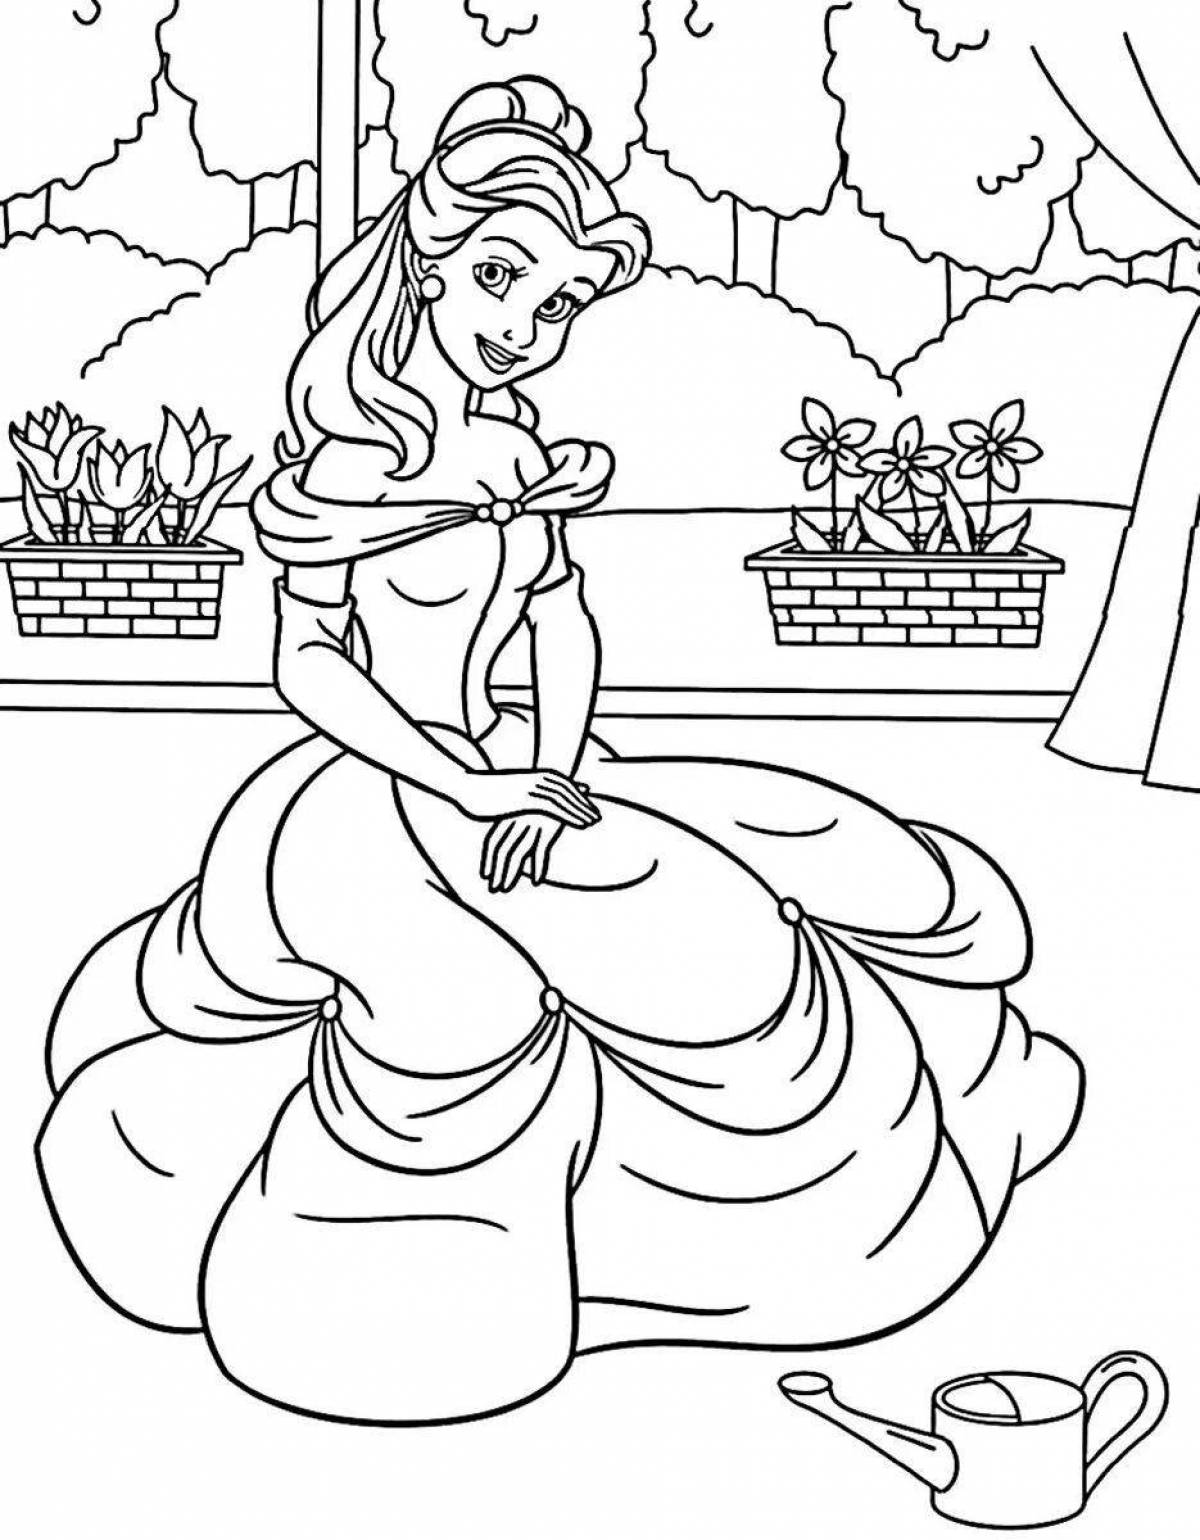 Lovely coloring pages with little princesses